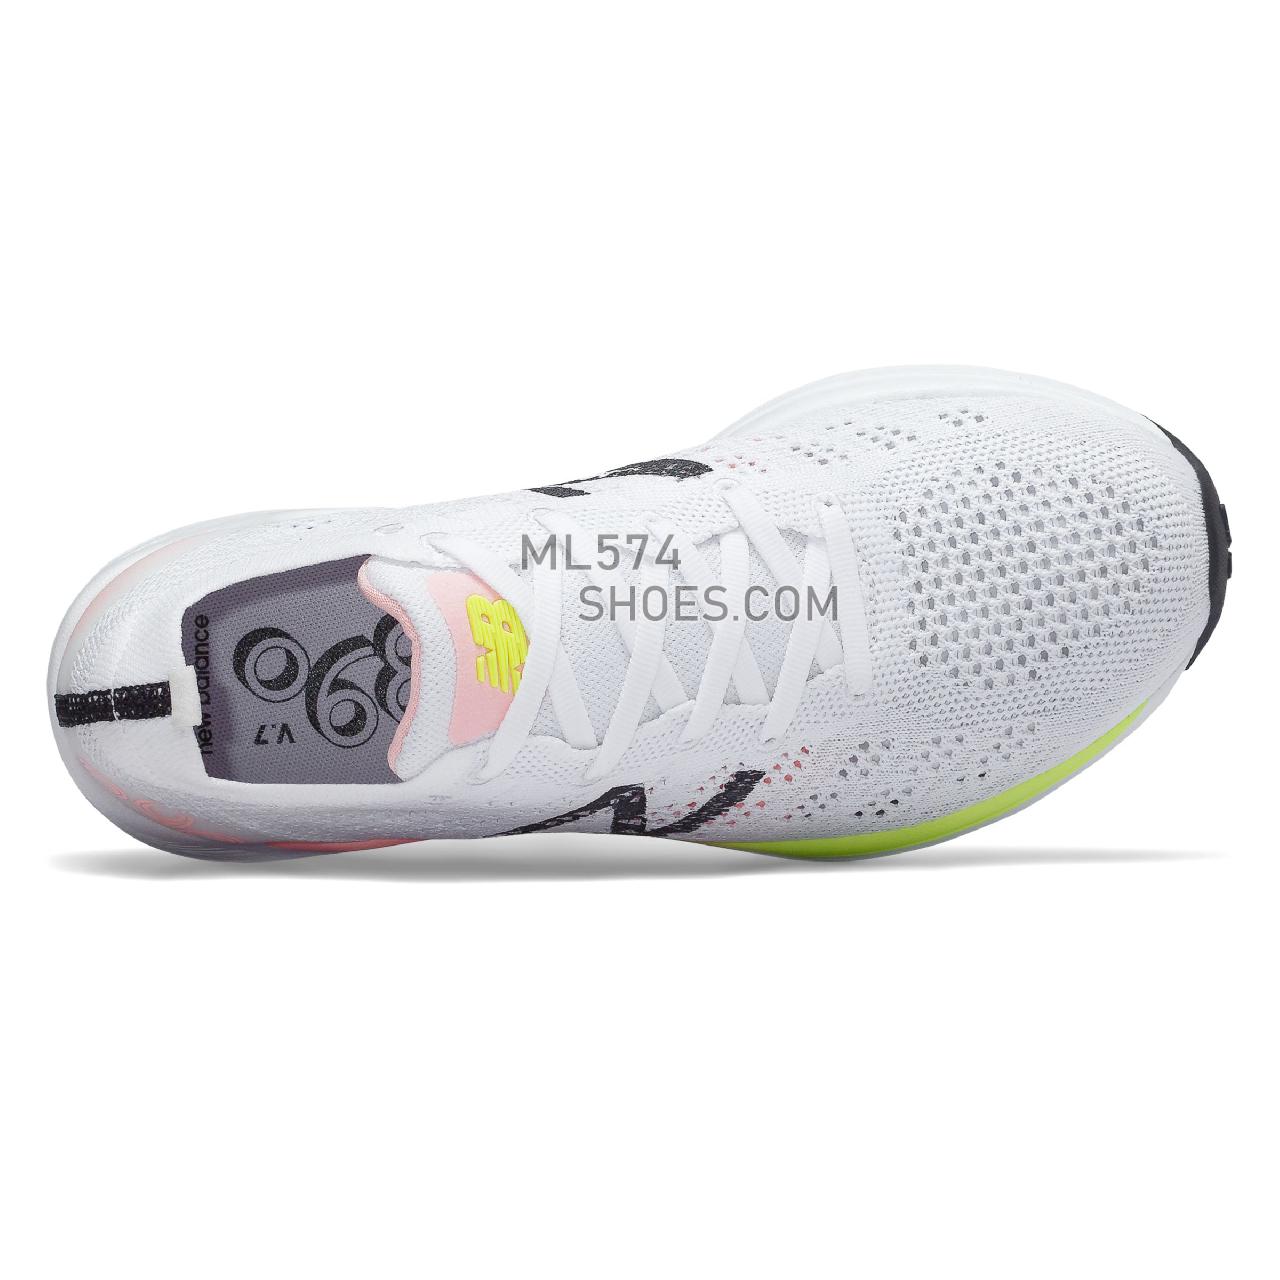 New Balance 890v7 - Women's Neutral Running - White with Guava Glo and Bleached Lime Glo - W890WO7